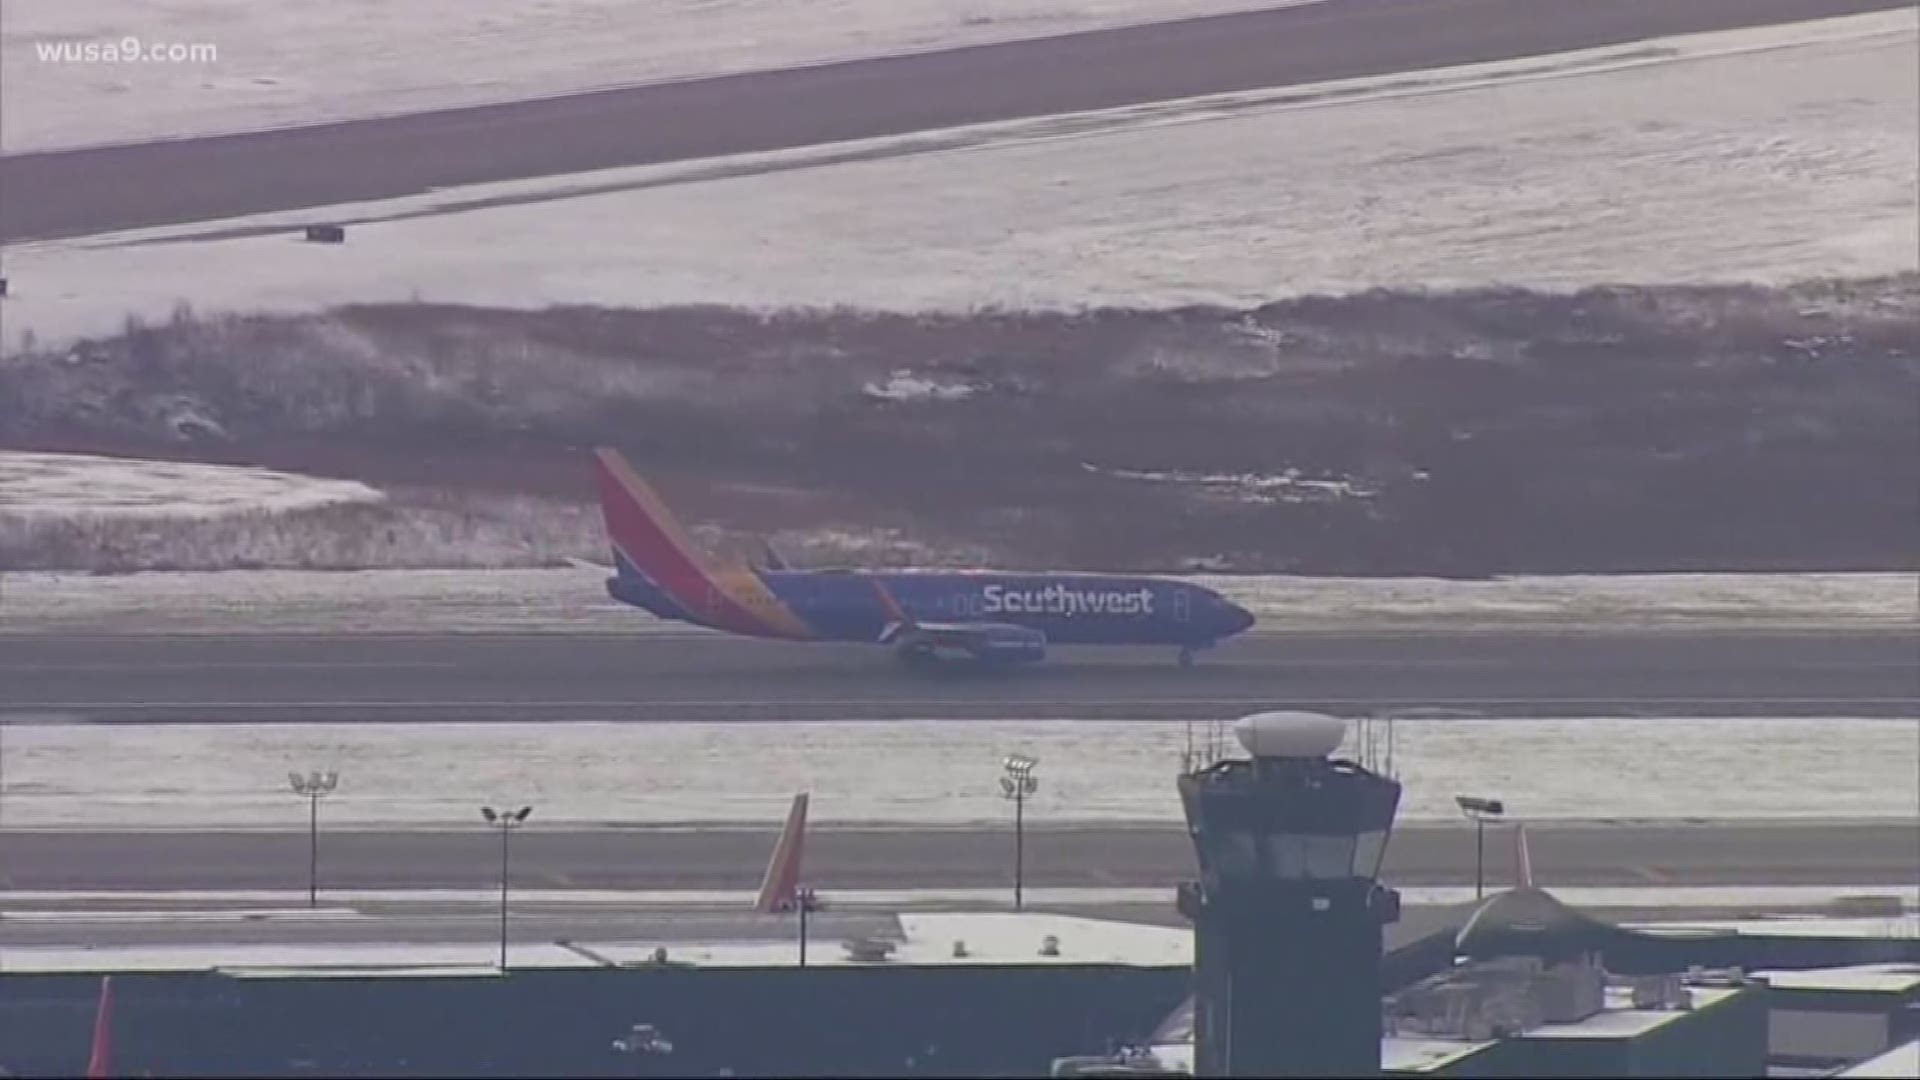 Southwest Airlines said a "connectivity issue" slowed departures Tuesday.